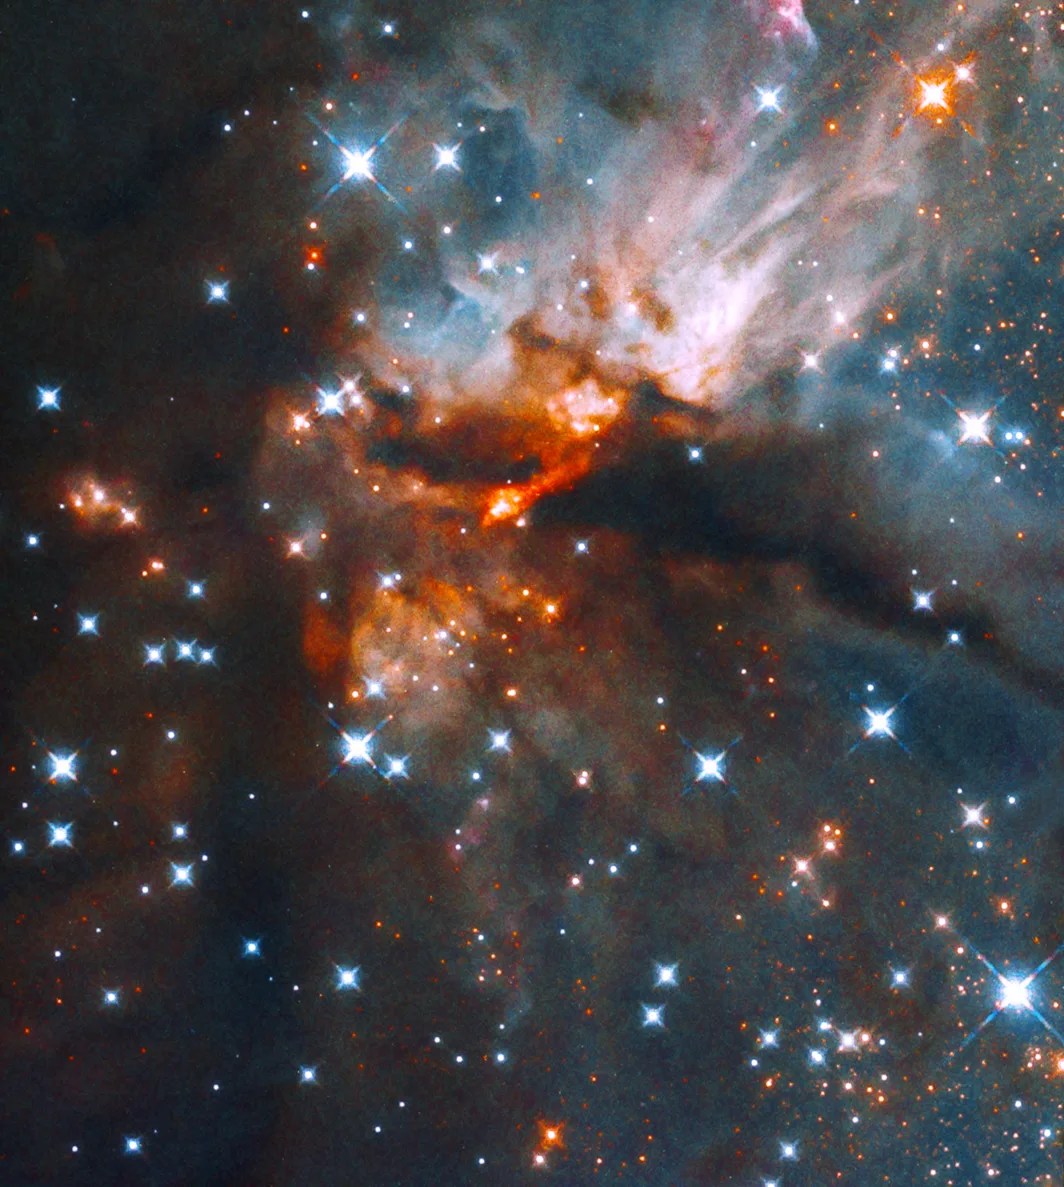 Blue and white, orange-red nebula bisected by a dark nebula, image is dotted with blue-white stars